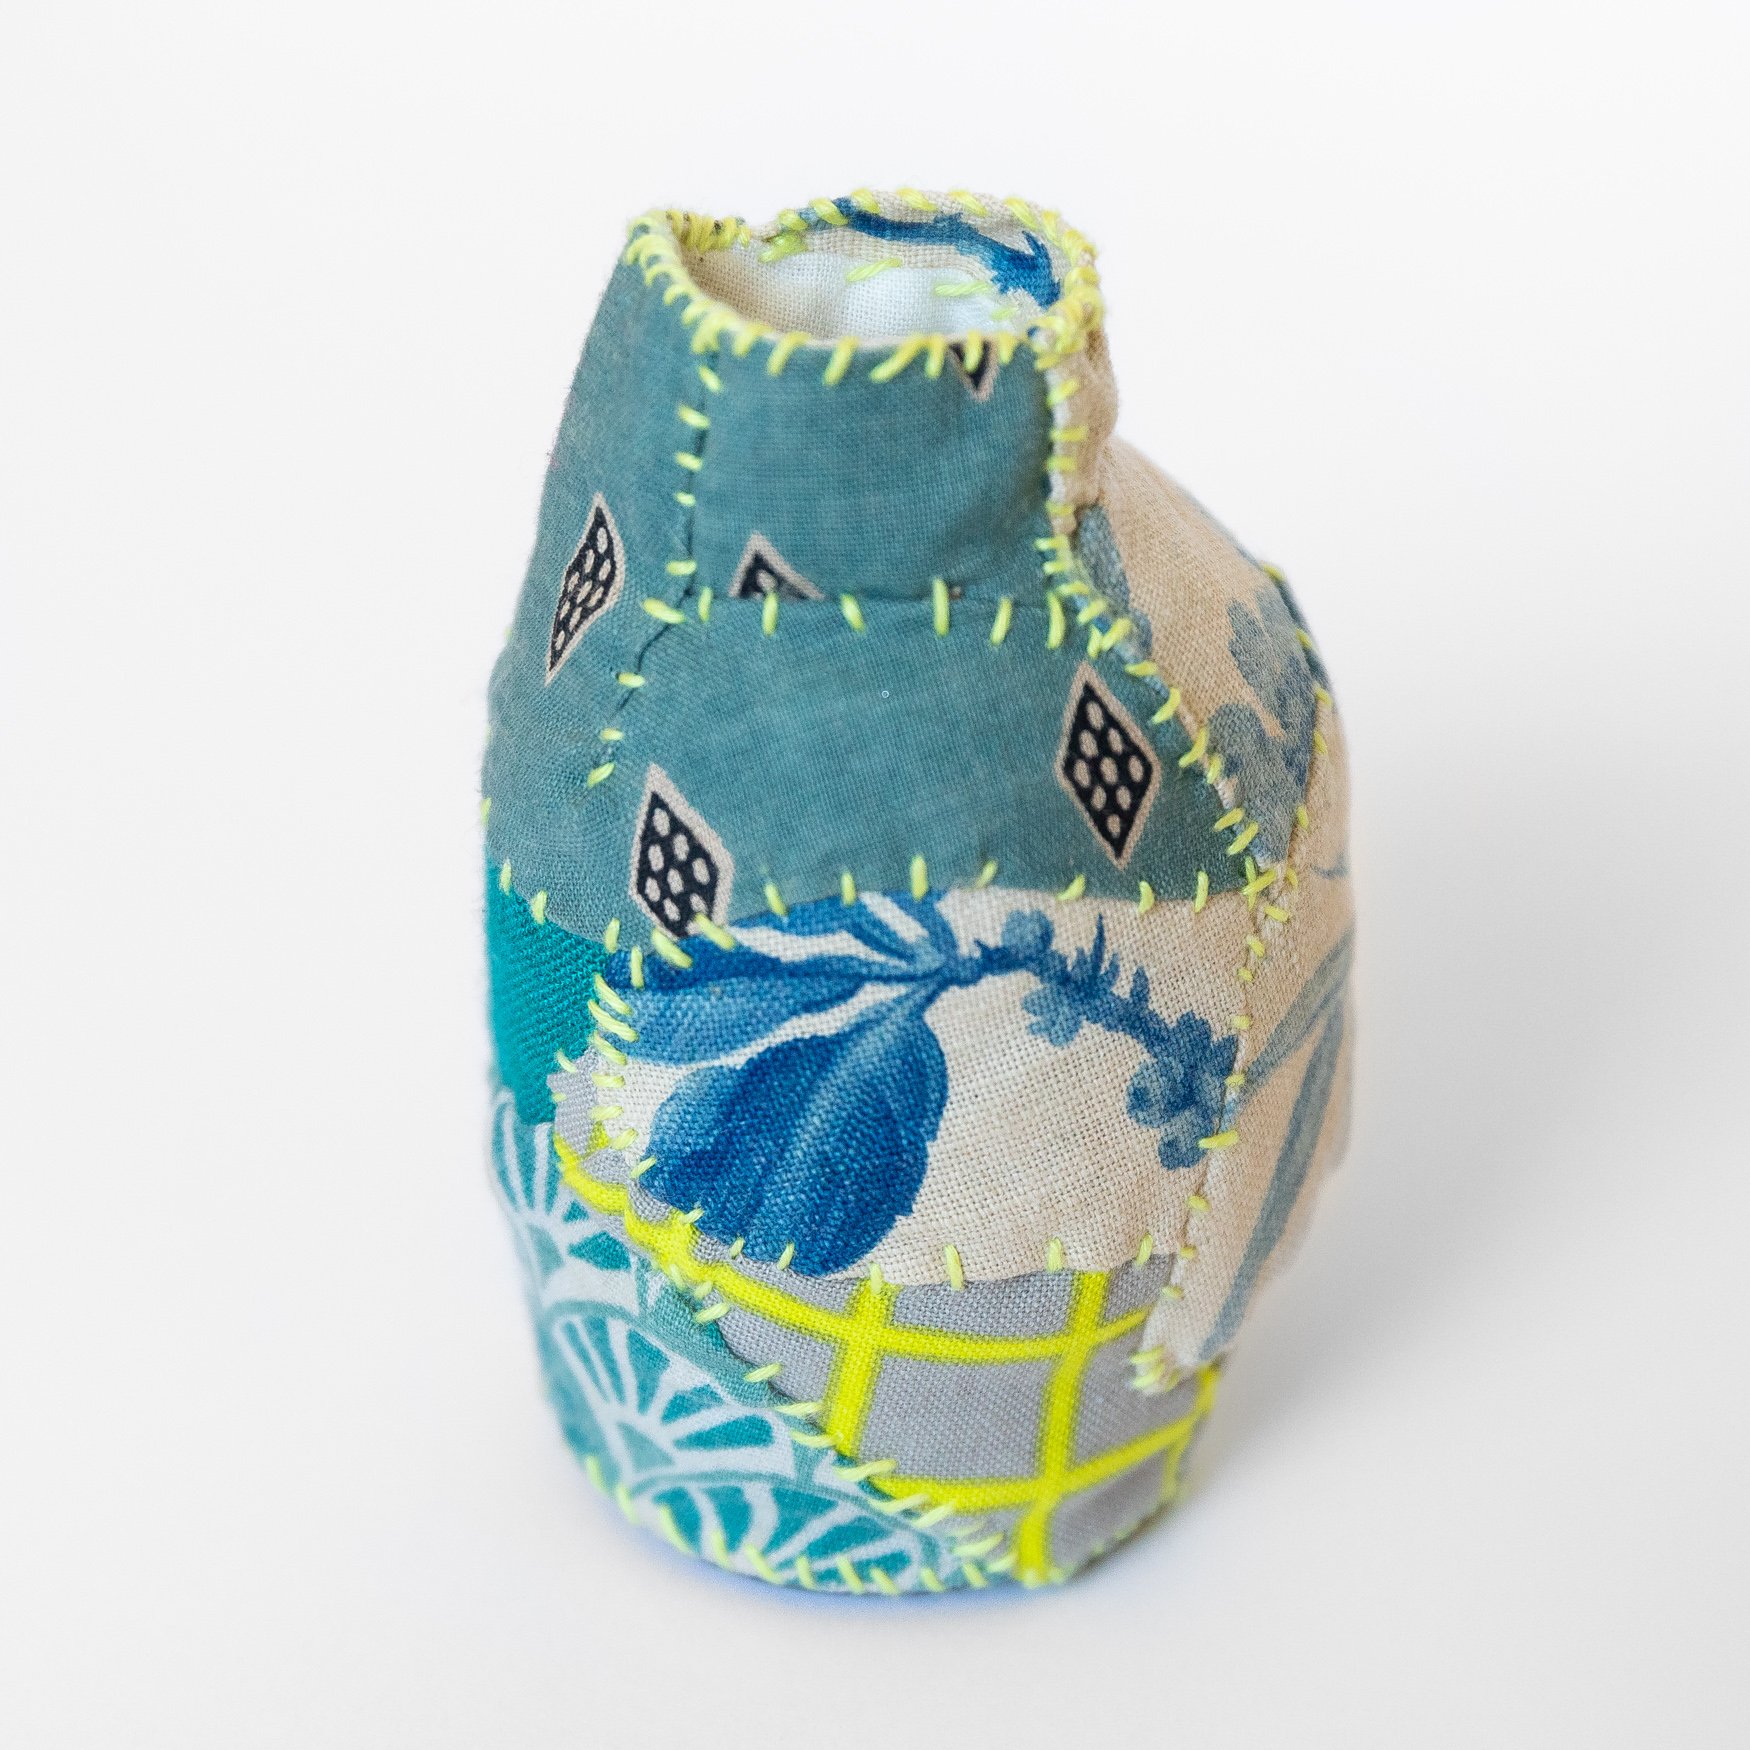 Melissa - Quilted Vase - A sustainably-made vase or vessel, both ...